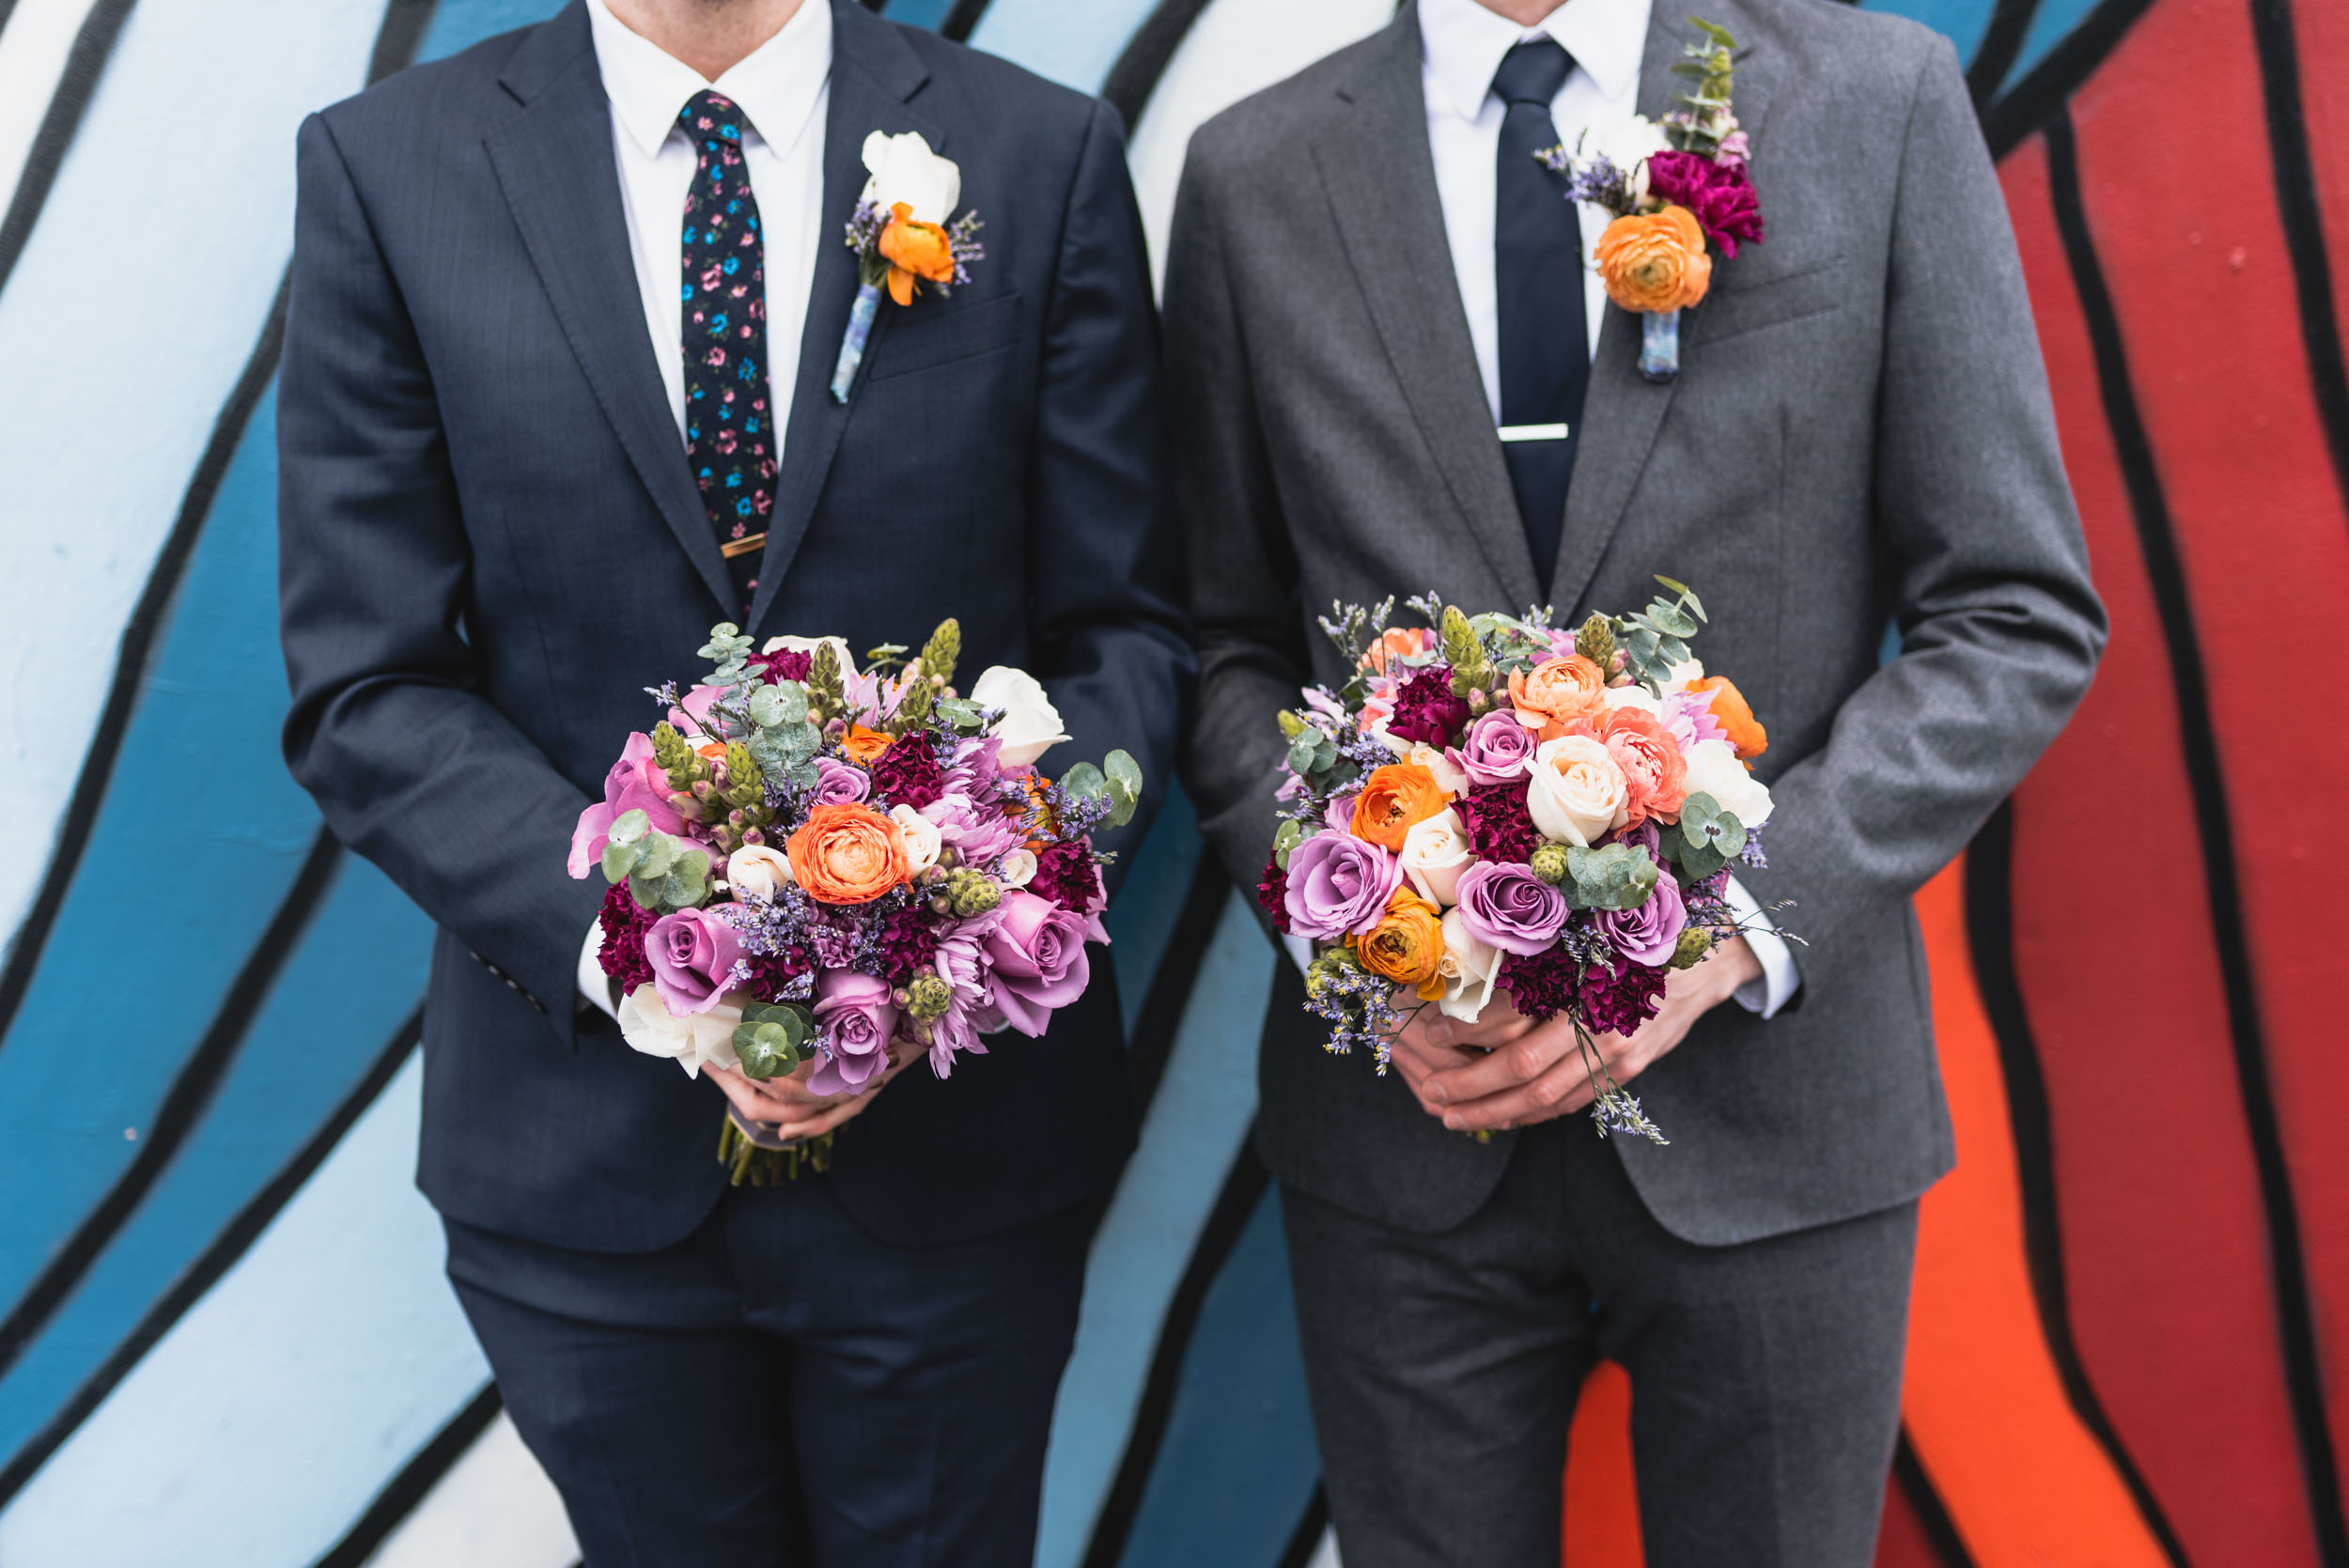 Groom and Best Man hold flowers